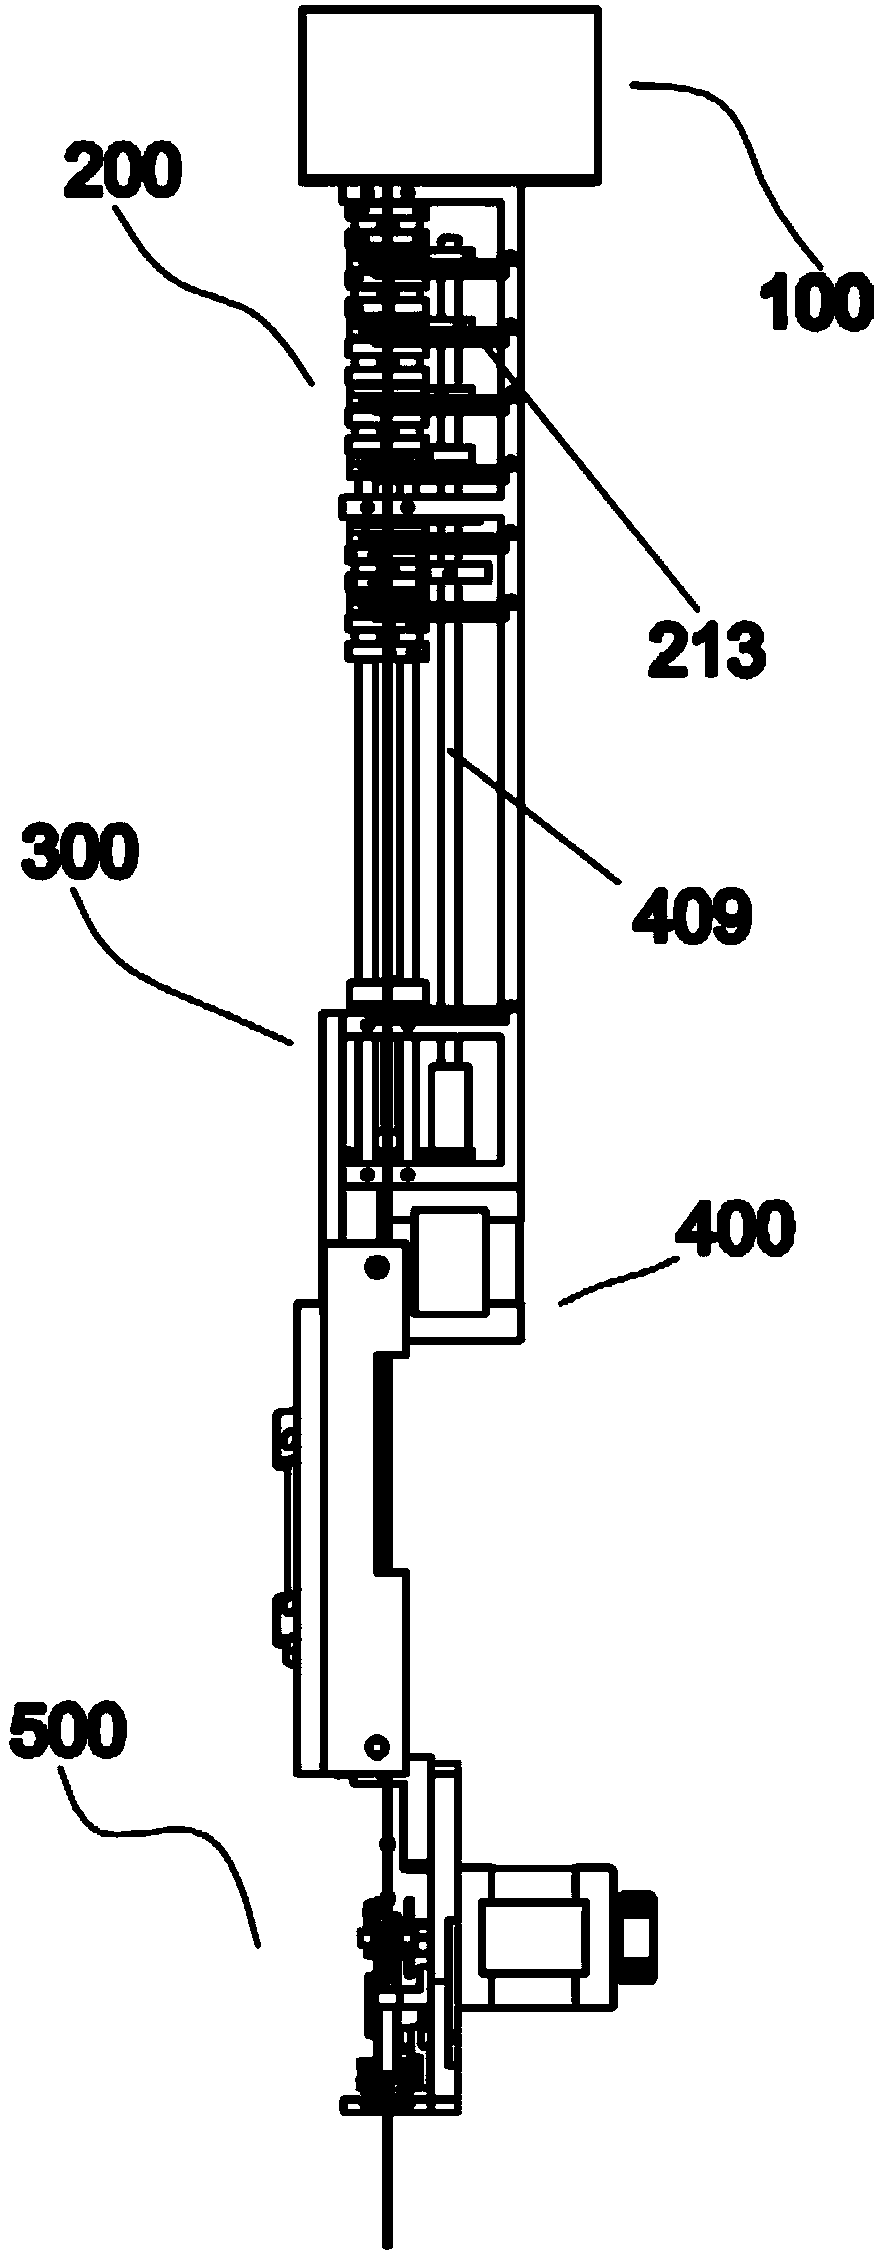 Bead arranging and feeding device of bead embroidery device